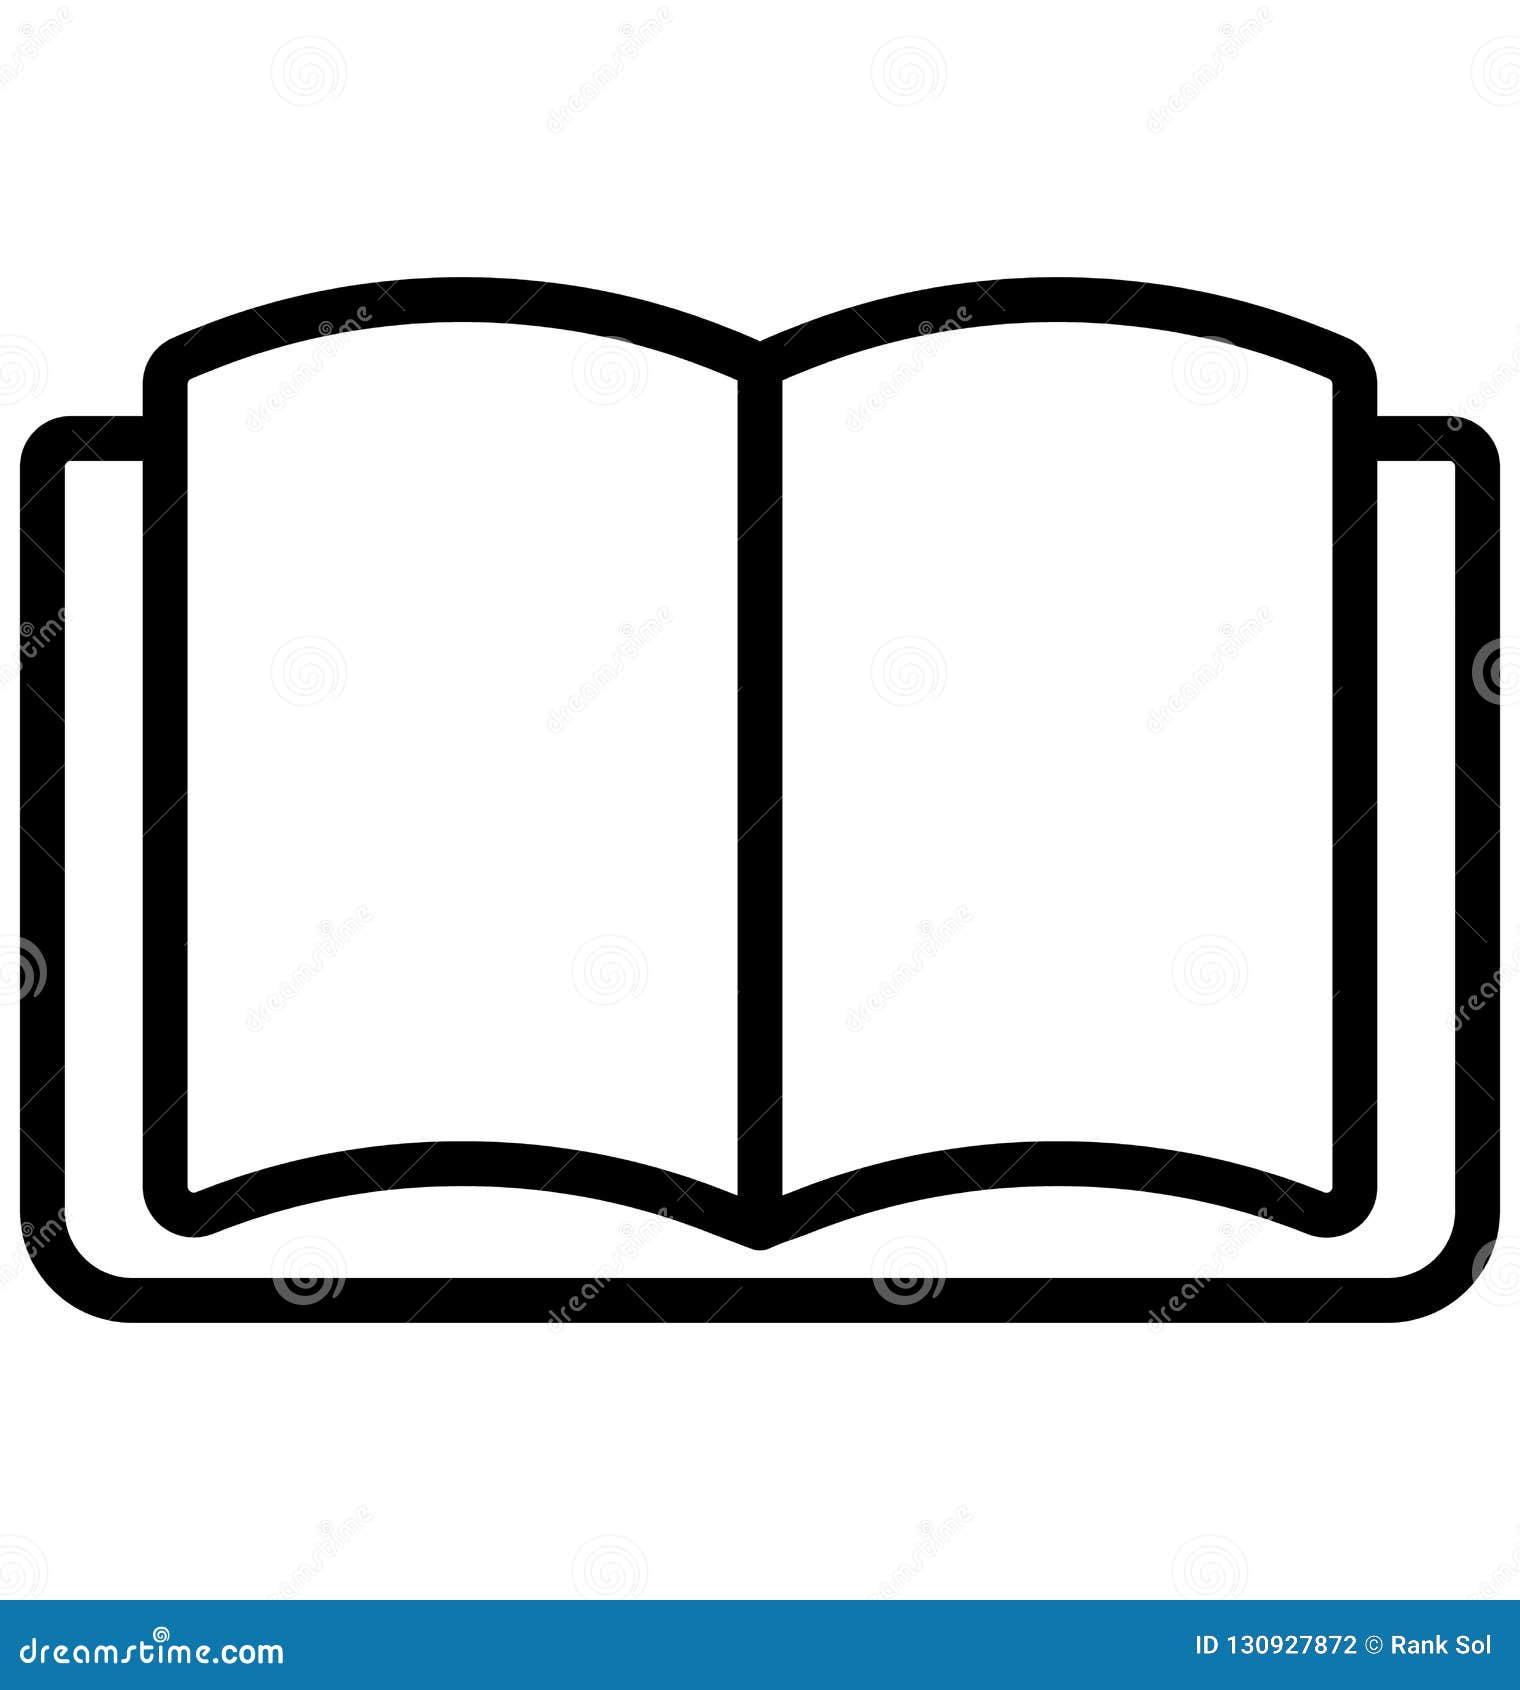 open book  line  icon that can be easily modified or edited.